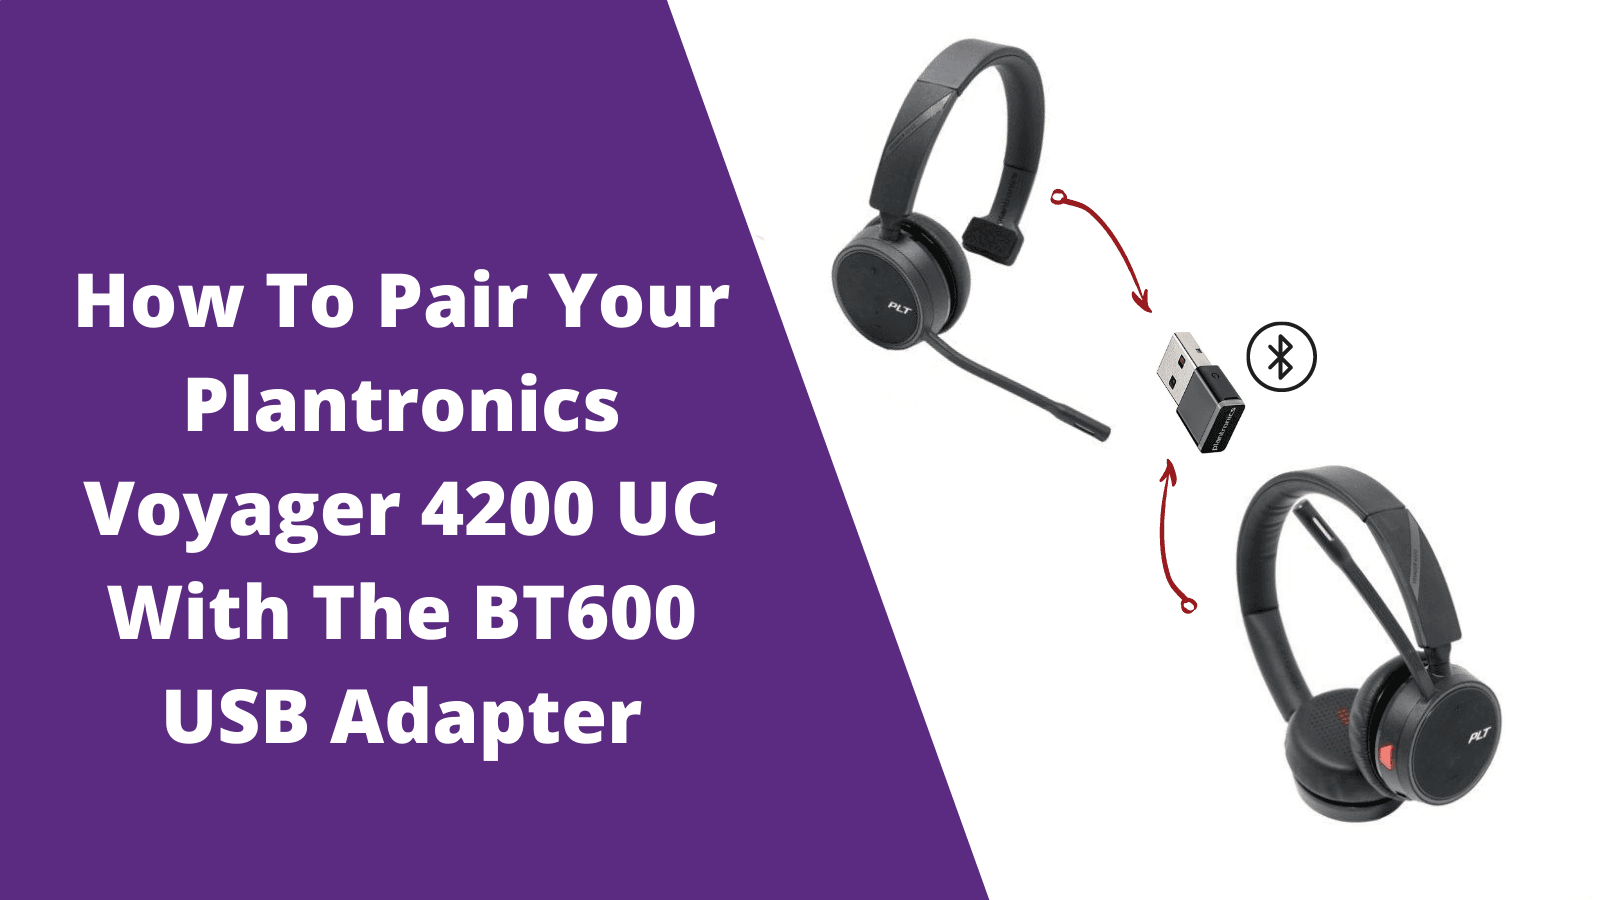 To Pair Your Voyager 4200 UC With The USB Adapte